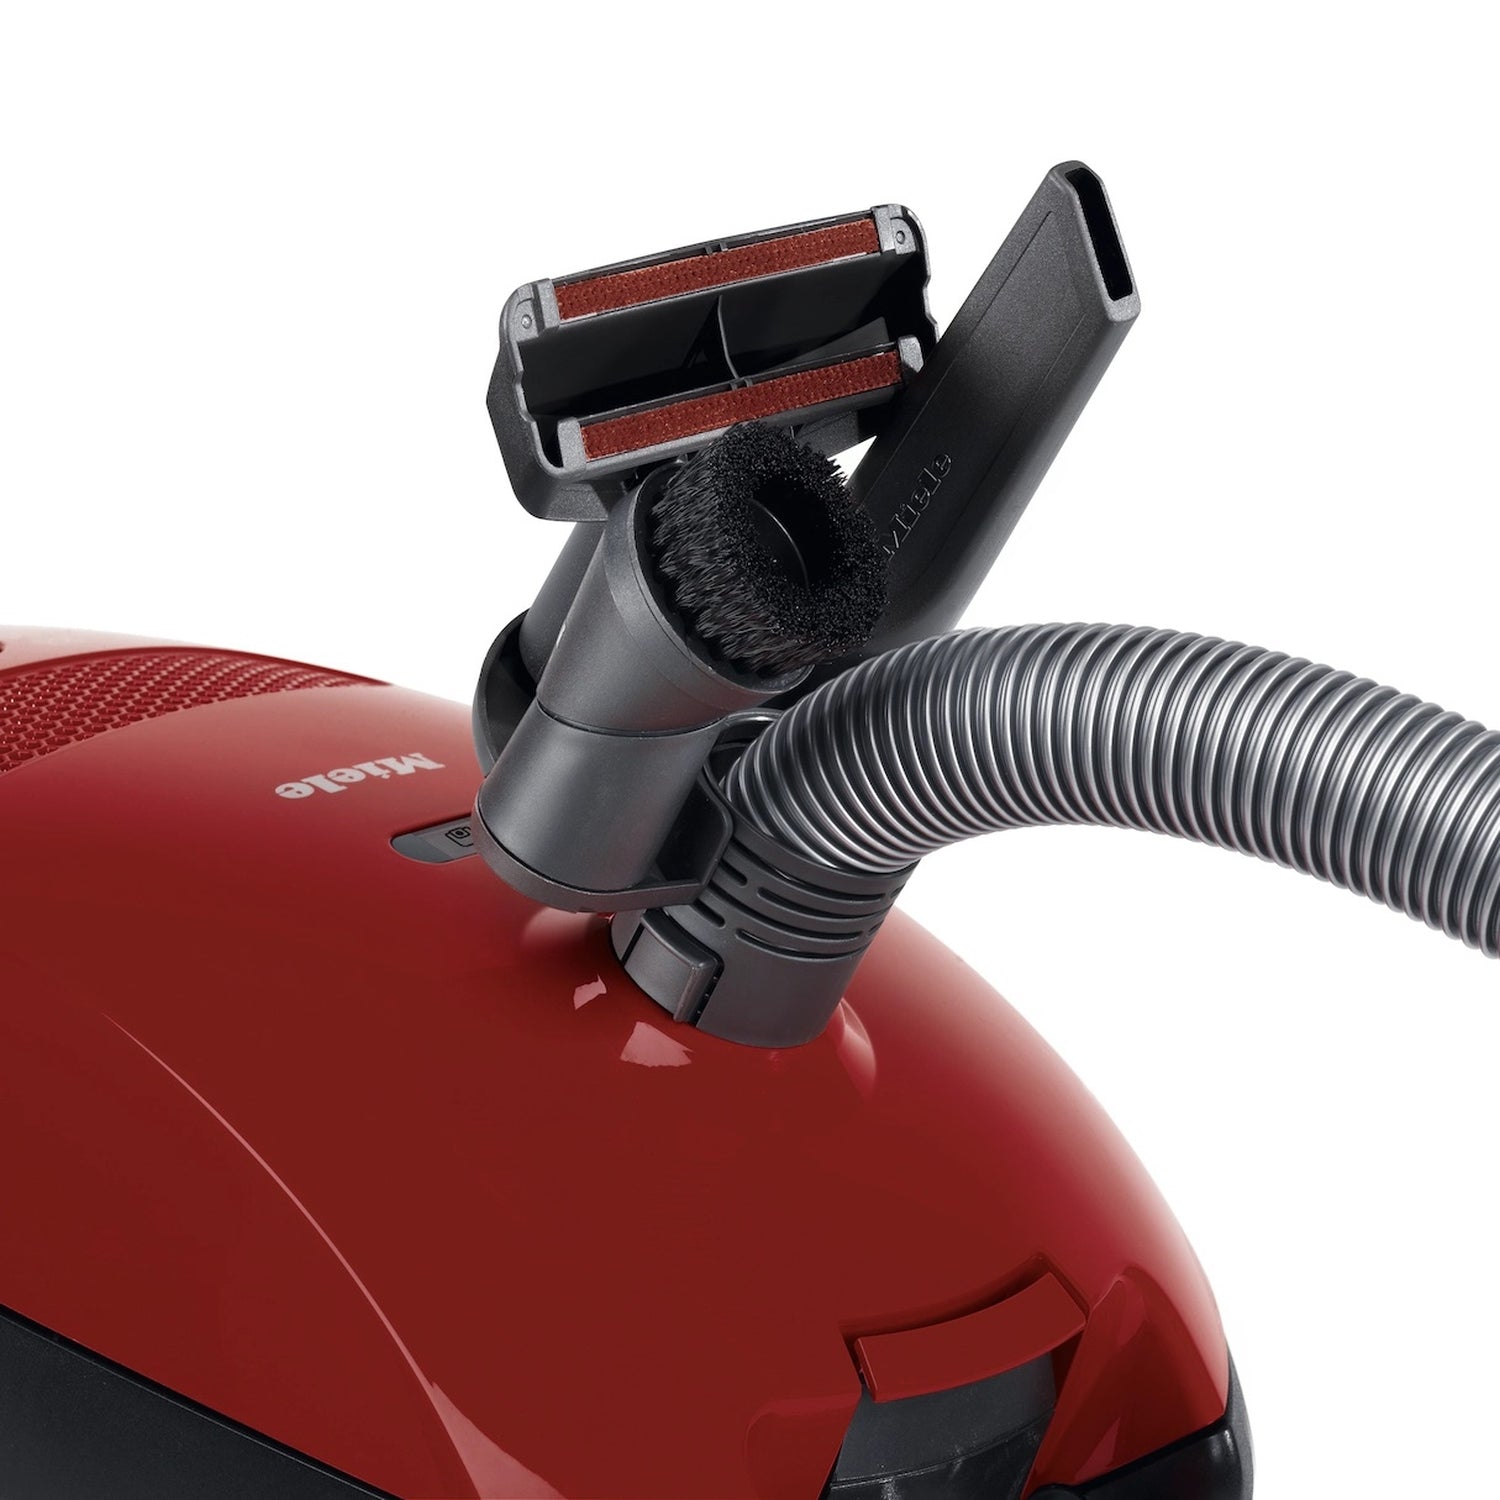 Miele Classic C1 HomeCare Electro+ Canister Vacuum with HEPA - Buckhead Vacuums